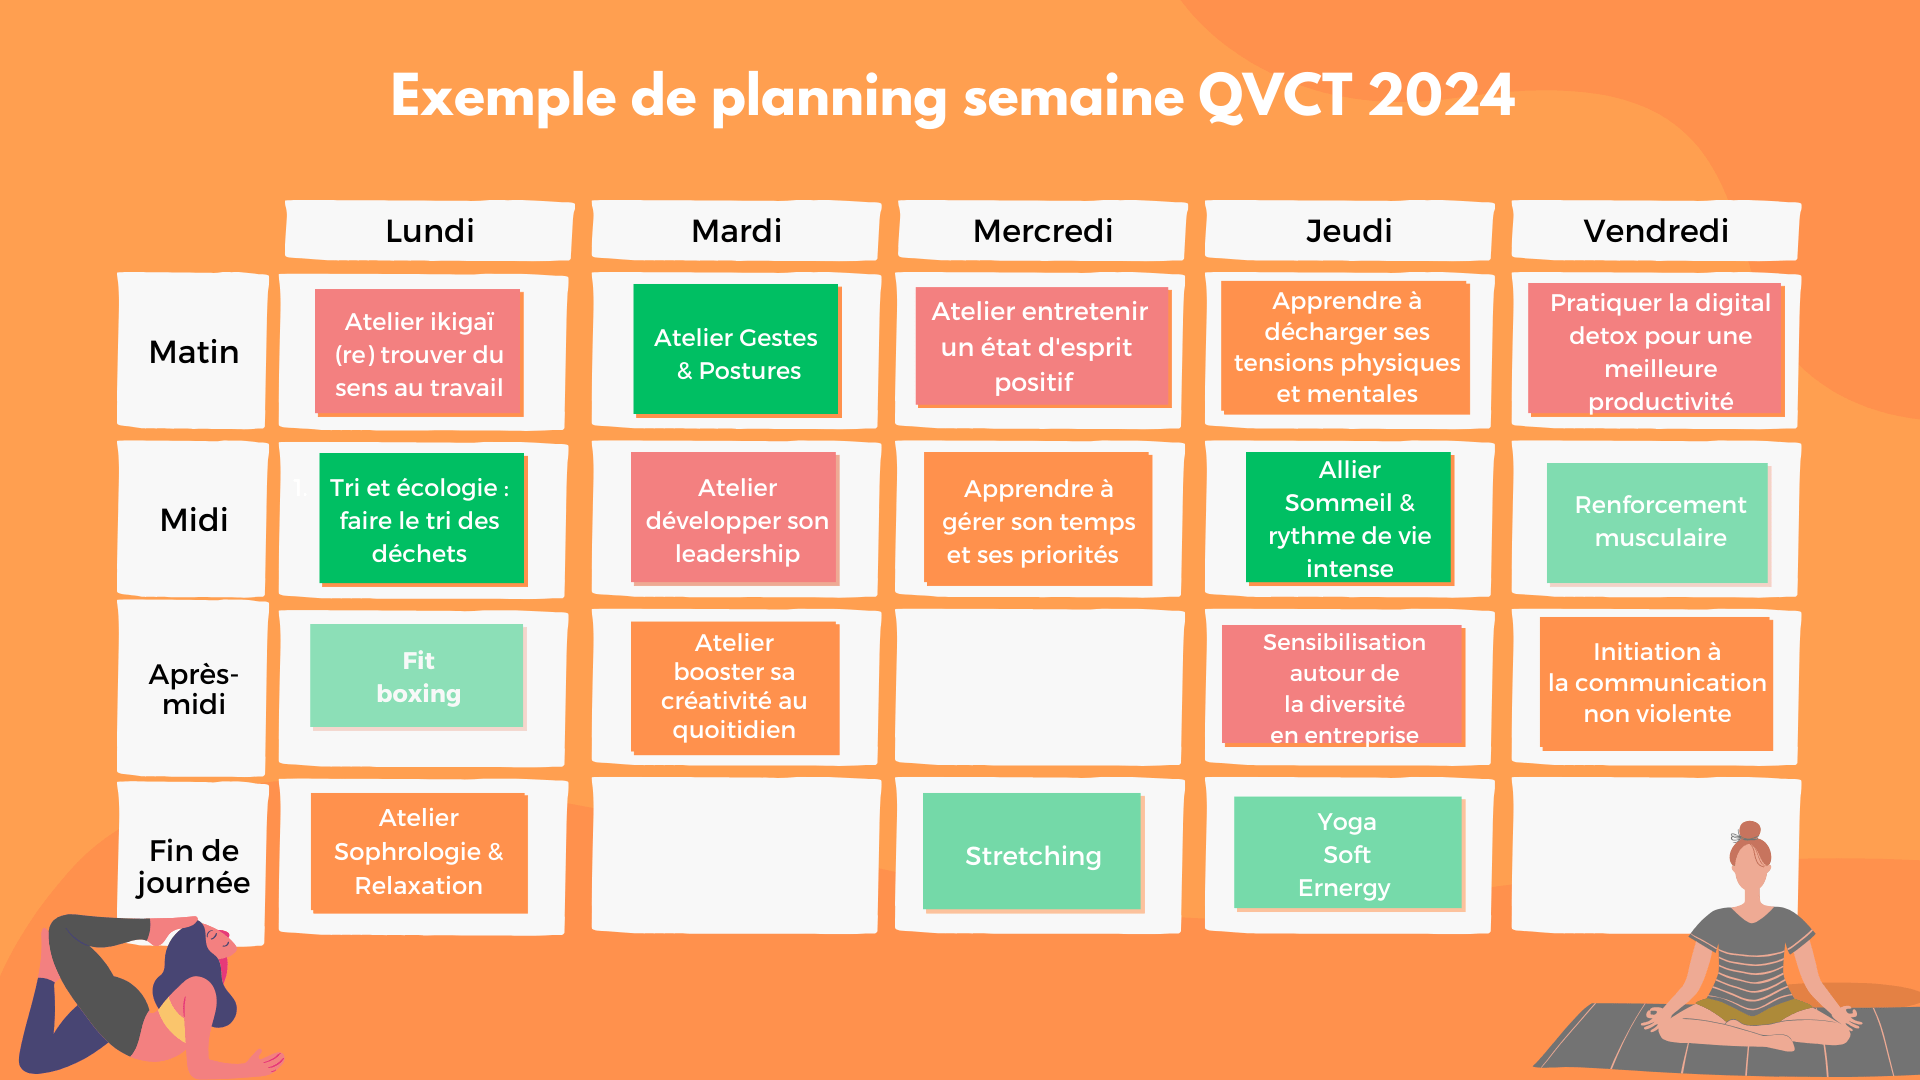 Planning SQVCT 2024